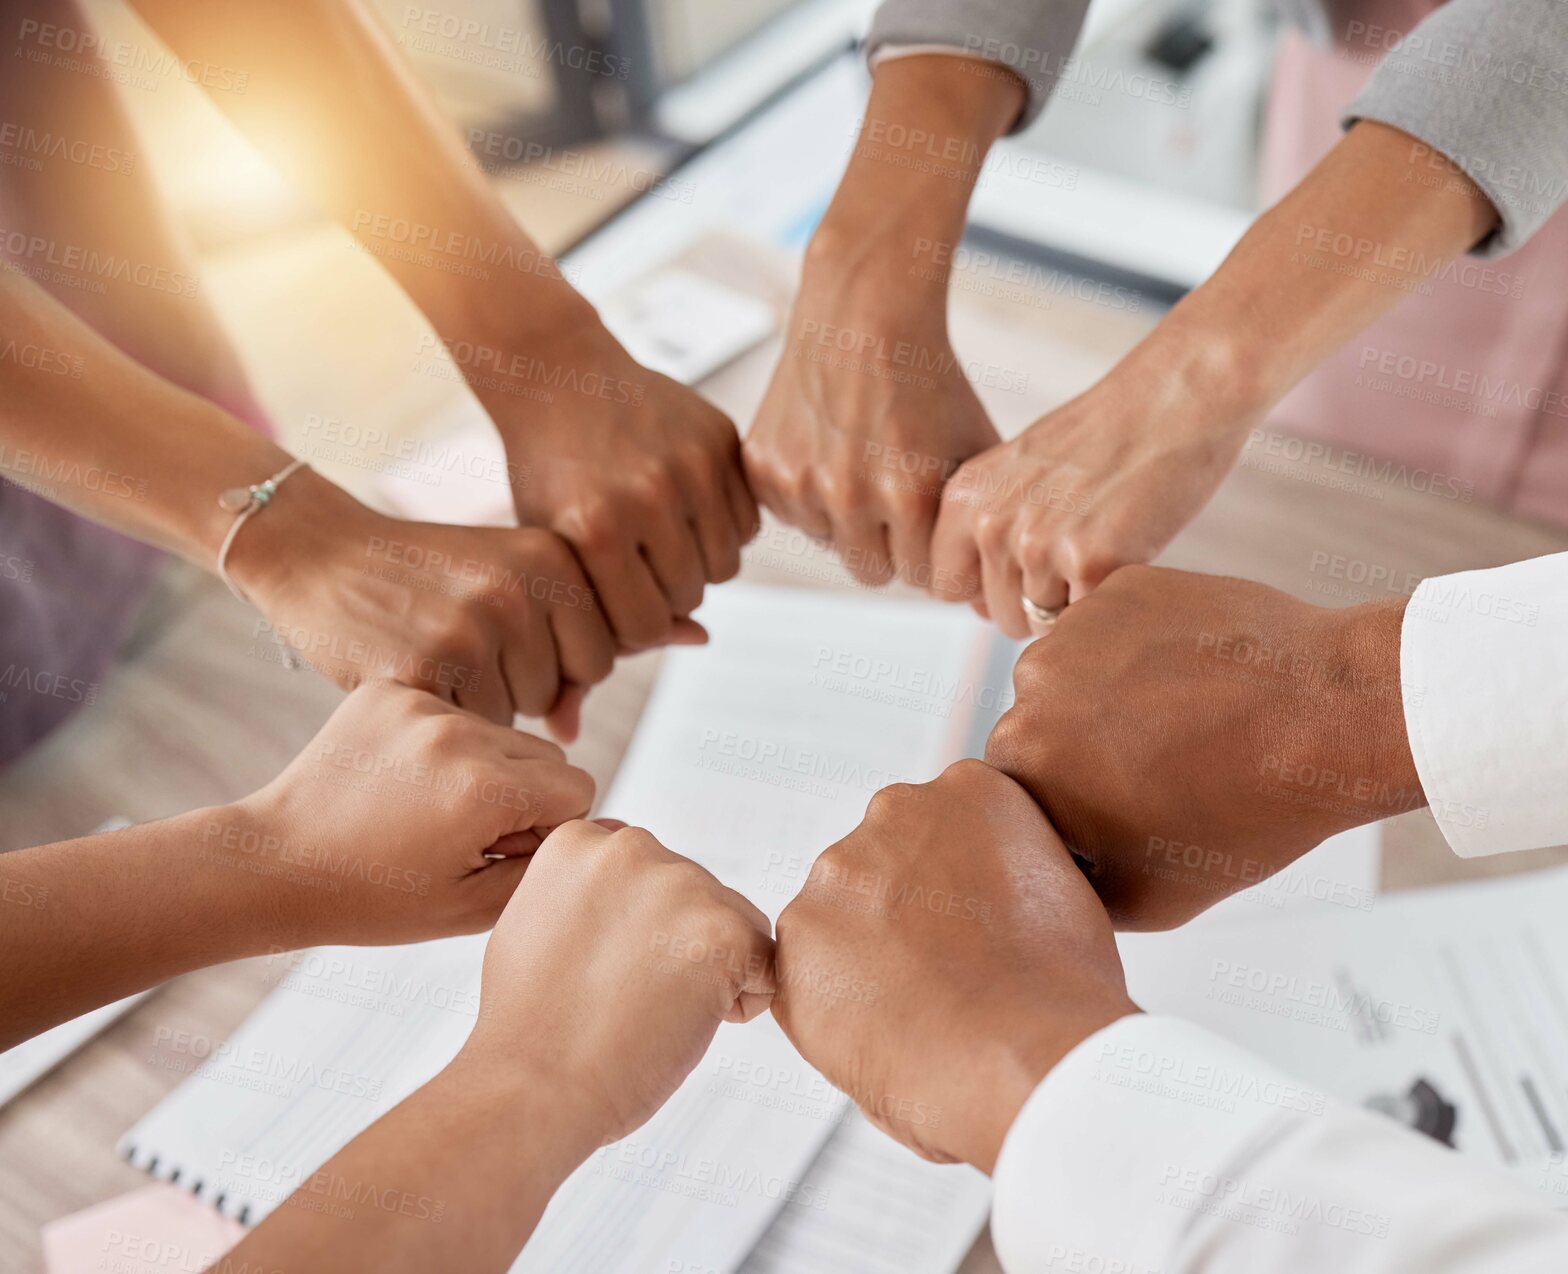 Buy stock photo Teamwork, support and circle of hands in fist of business people in meeting with documents. Diversity, collaboration and aerial of workers fists for motivation, community and growth in workplace